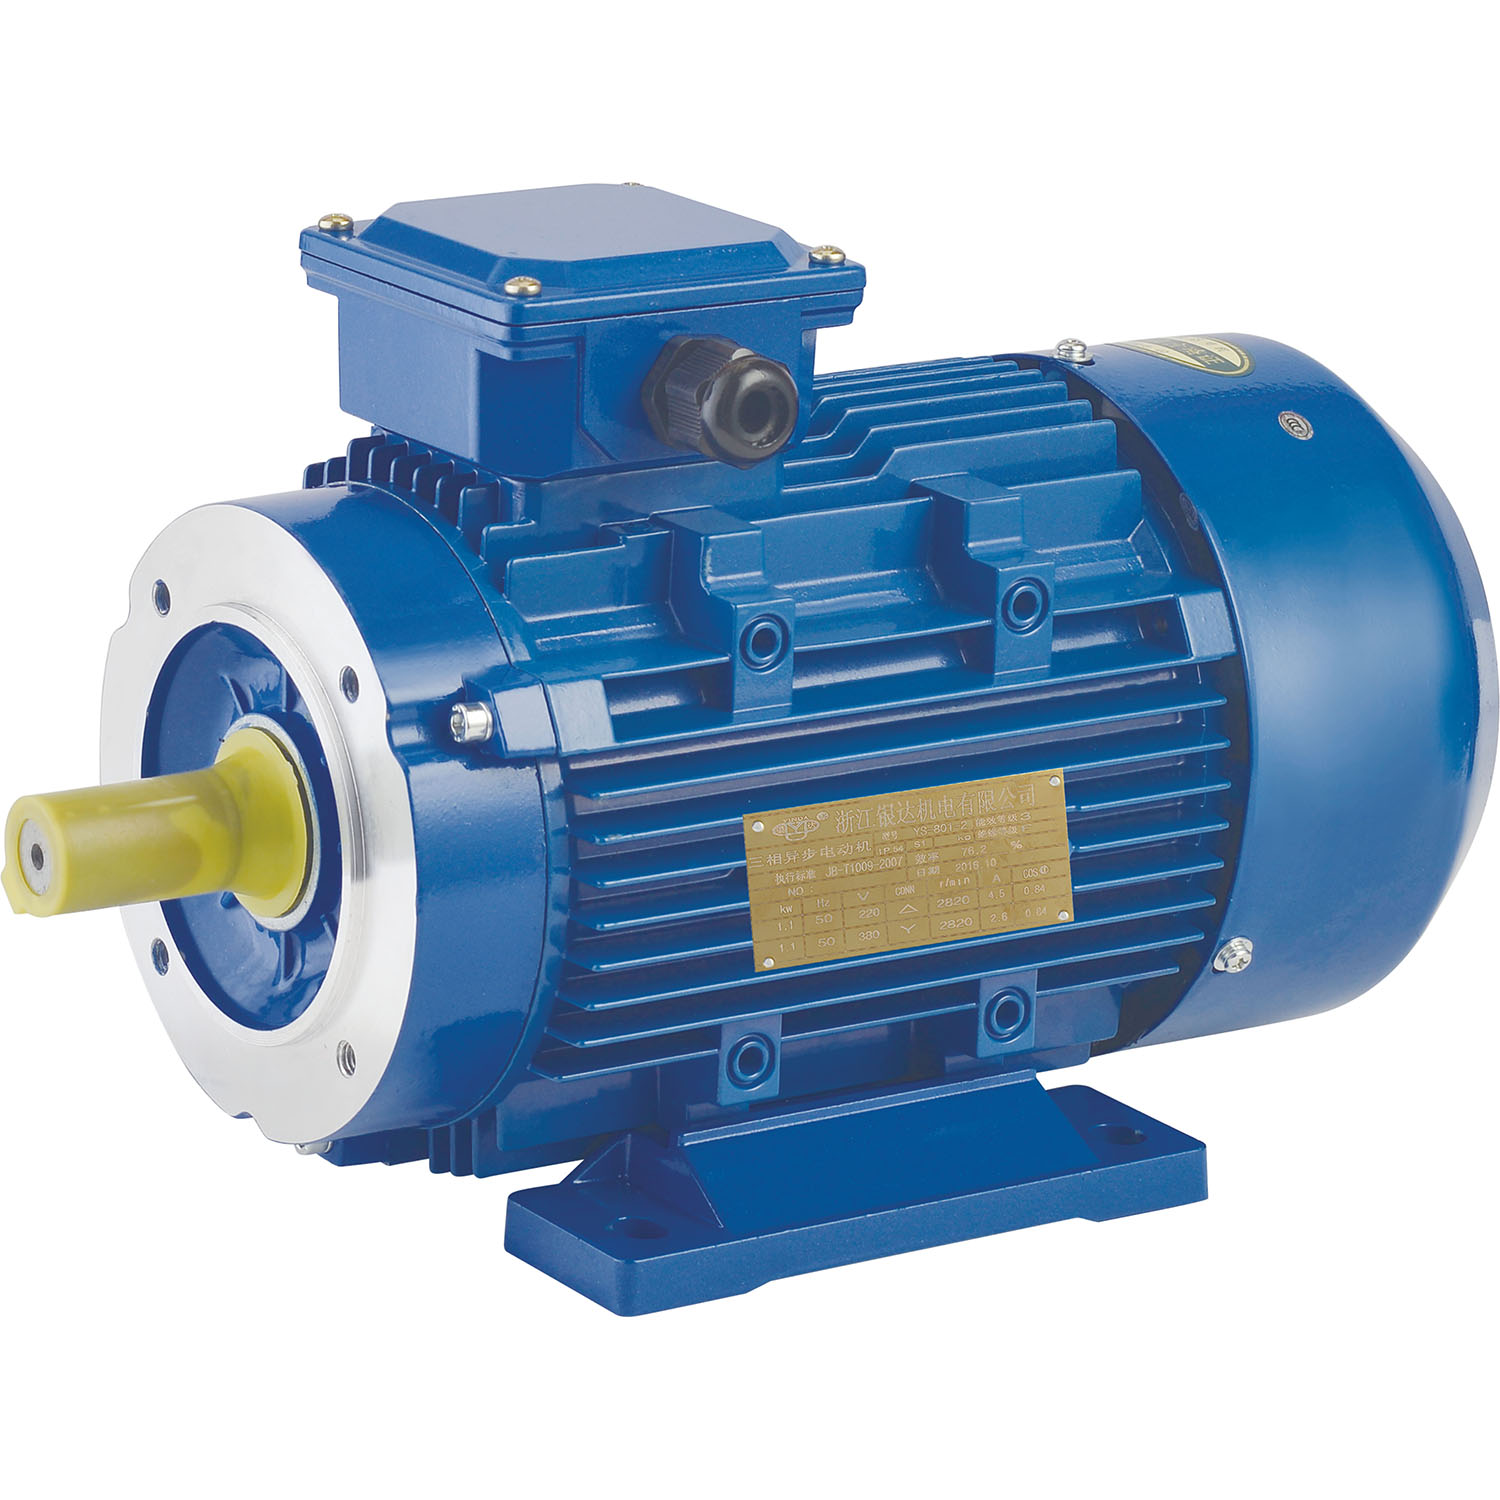 YX3-132S2-2 7.5KW 10HP aluminum cylinder series high efficiency three-phase asynchronous motor